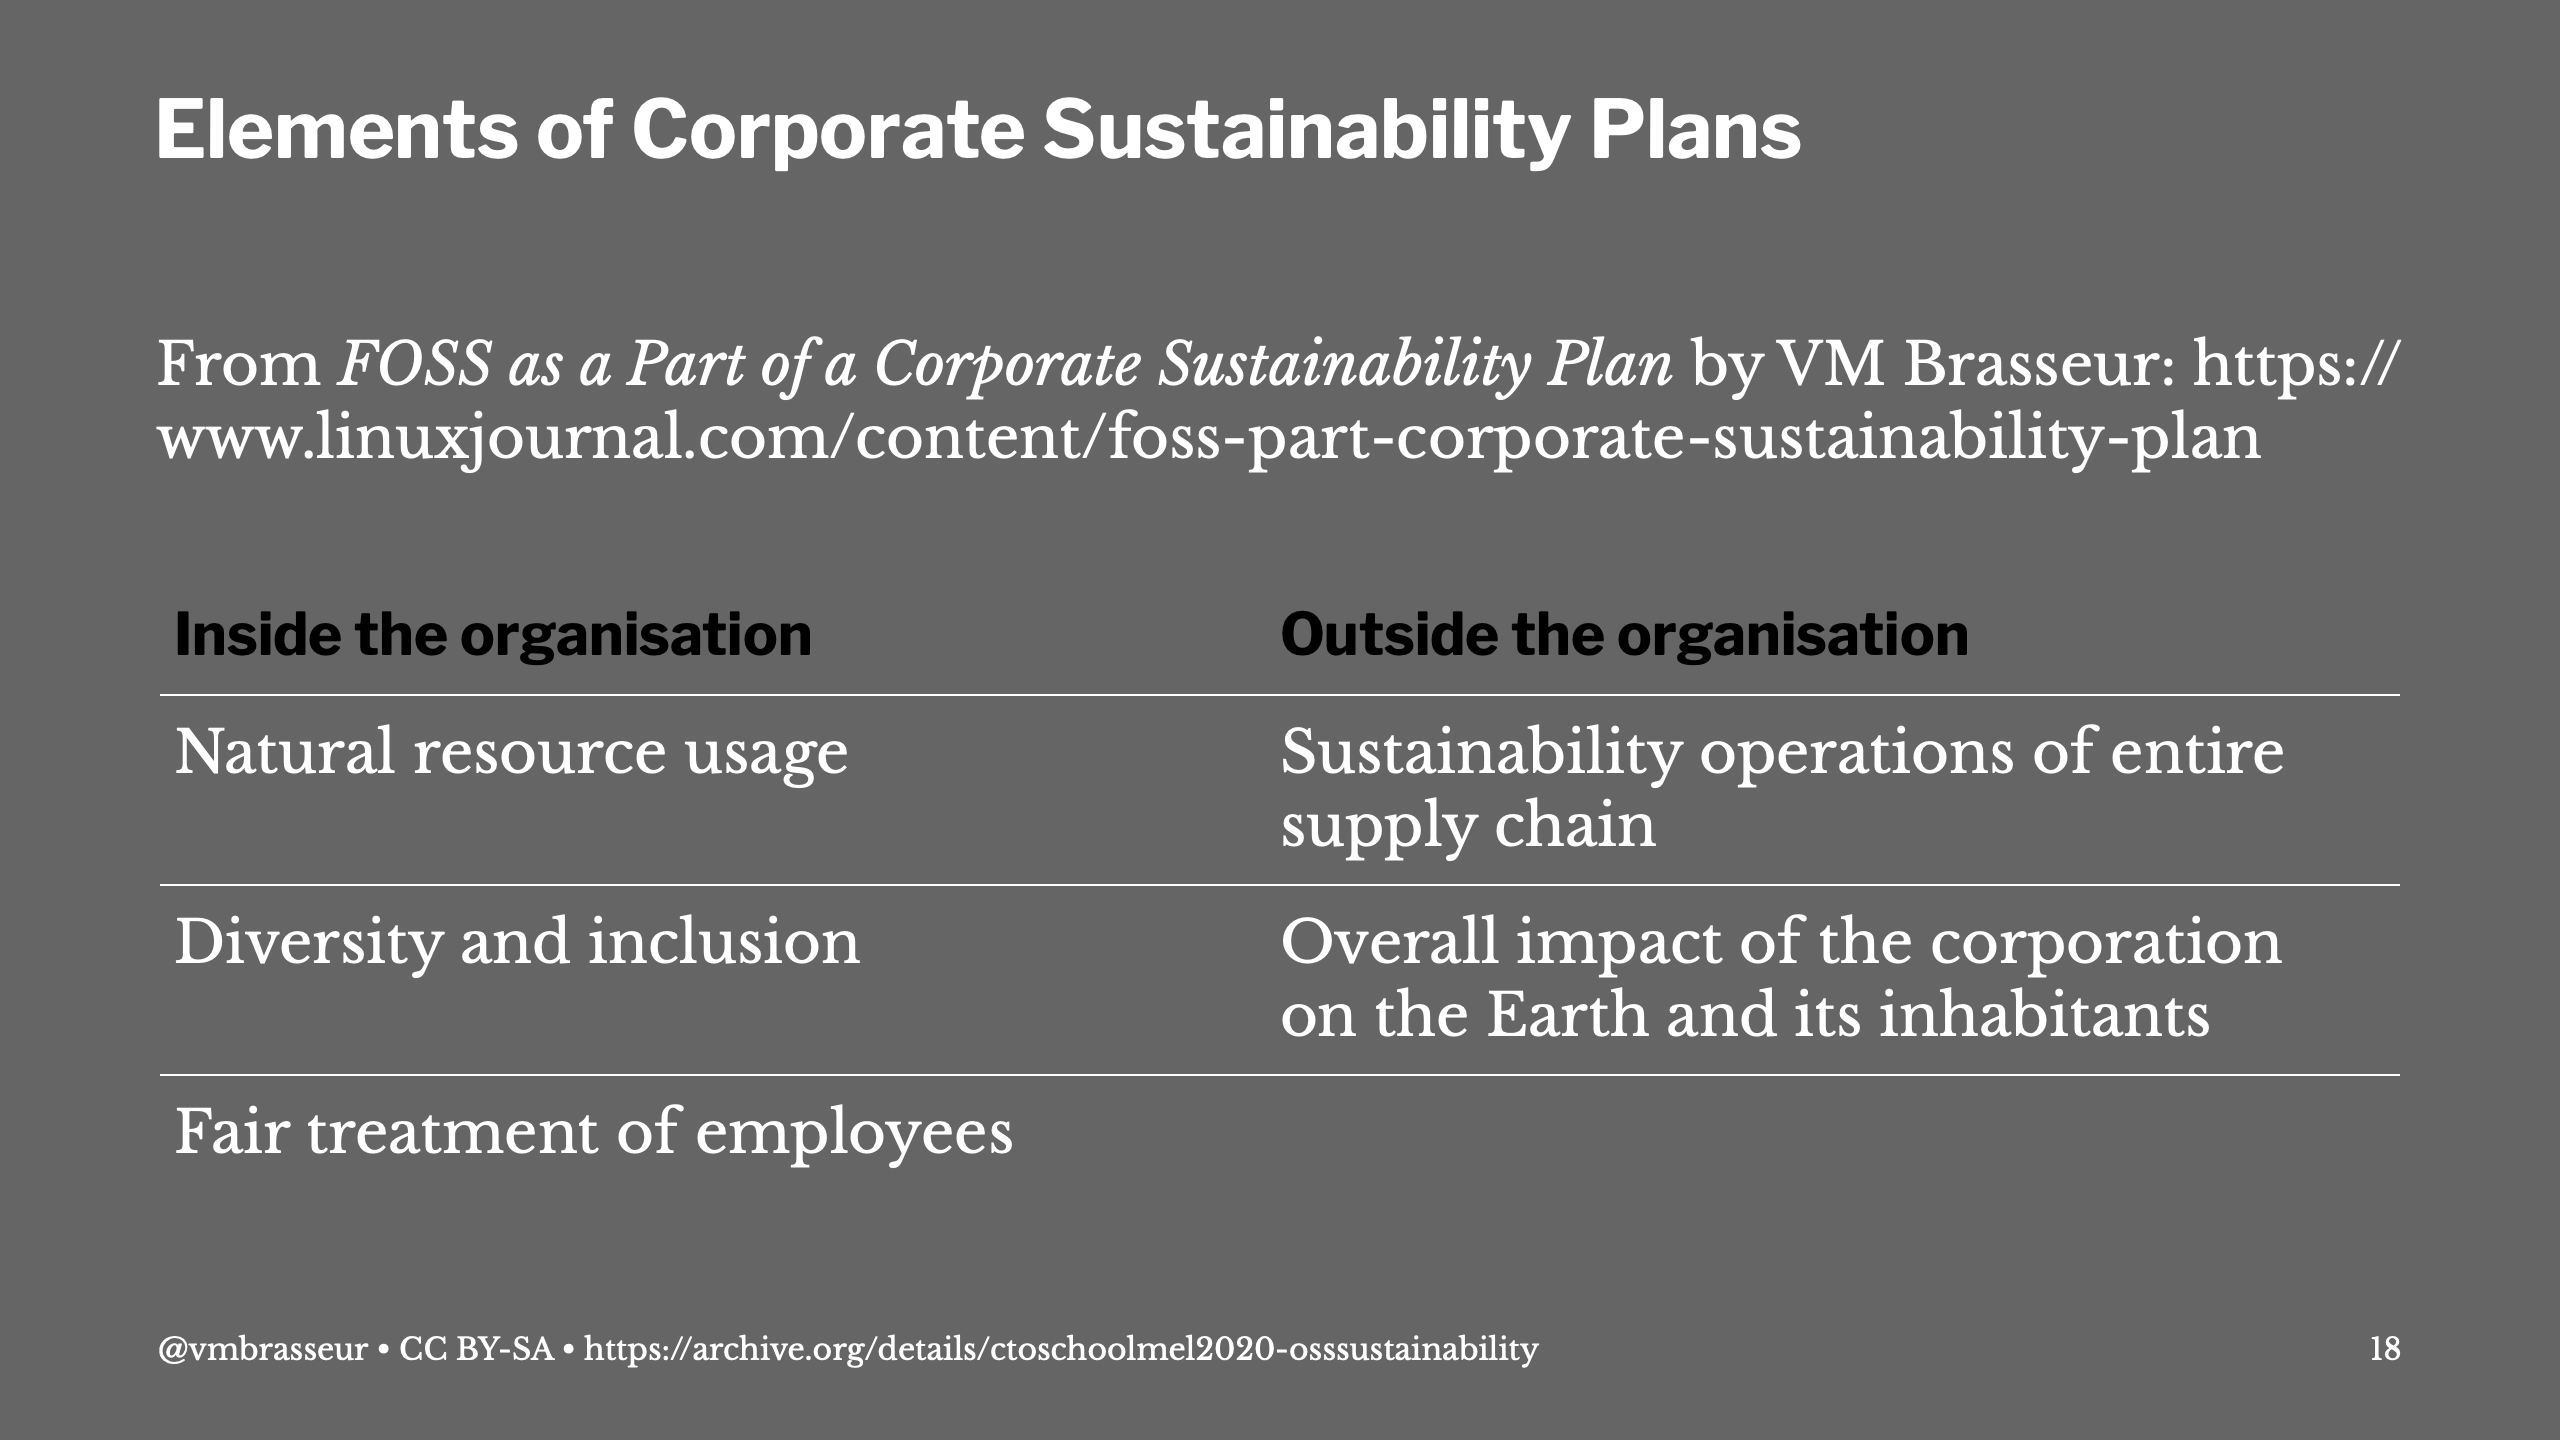 Link to an informational table from 'FOSS as a Part of a Corporate Sustainability Plan' article in Linux Journal